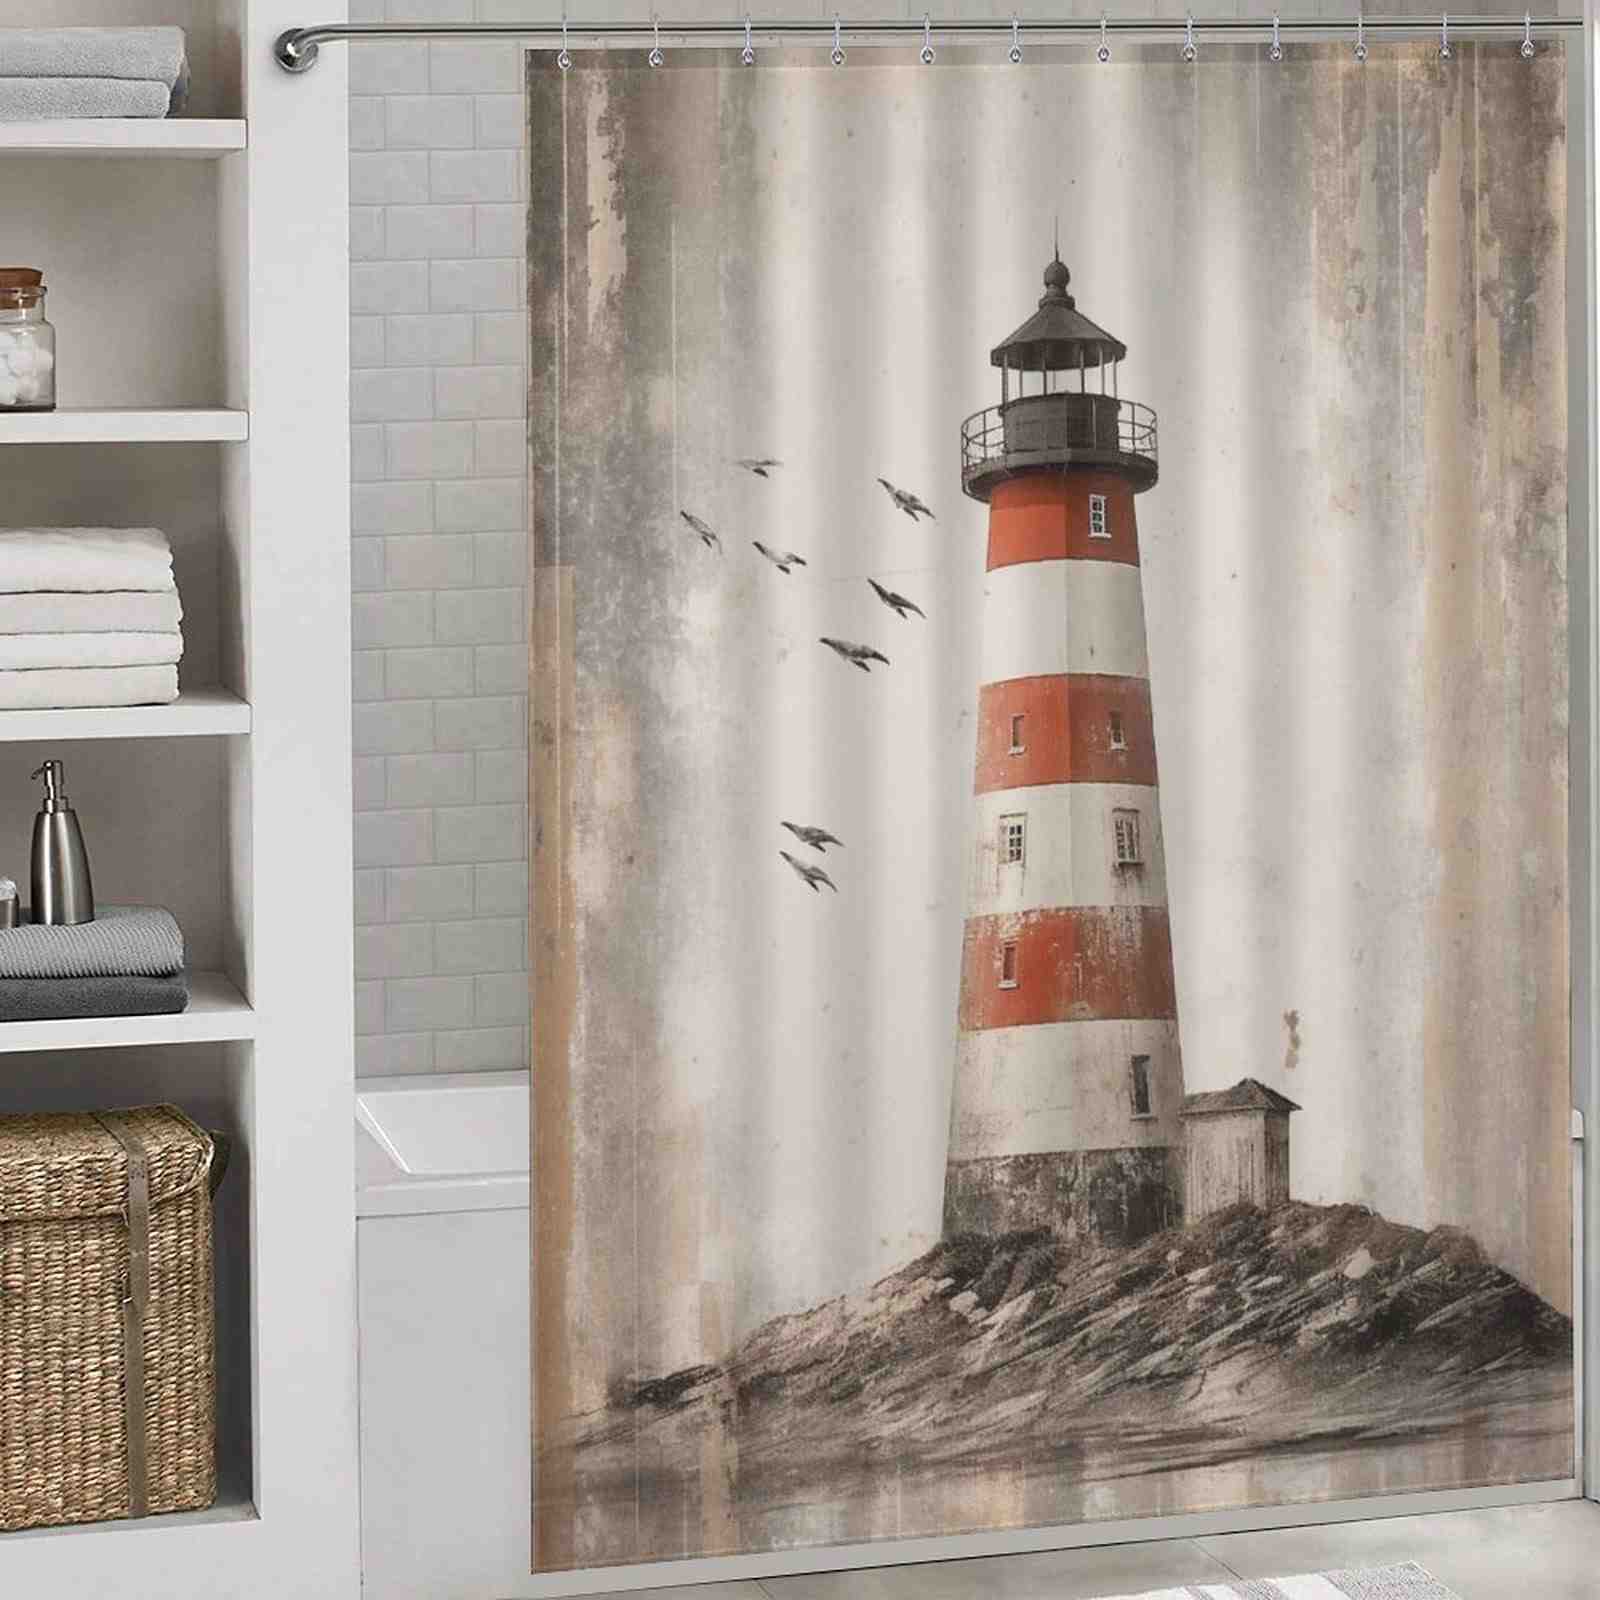 A rustic shower curtain with a vintage lighthouse on it, perfect for adding a touch of nostalgia to your bathroom decor.